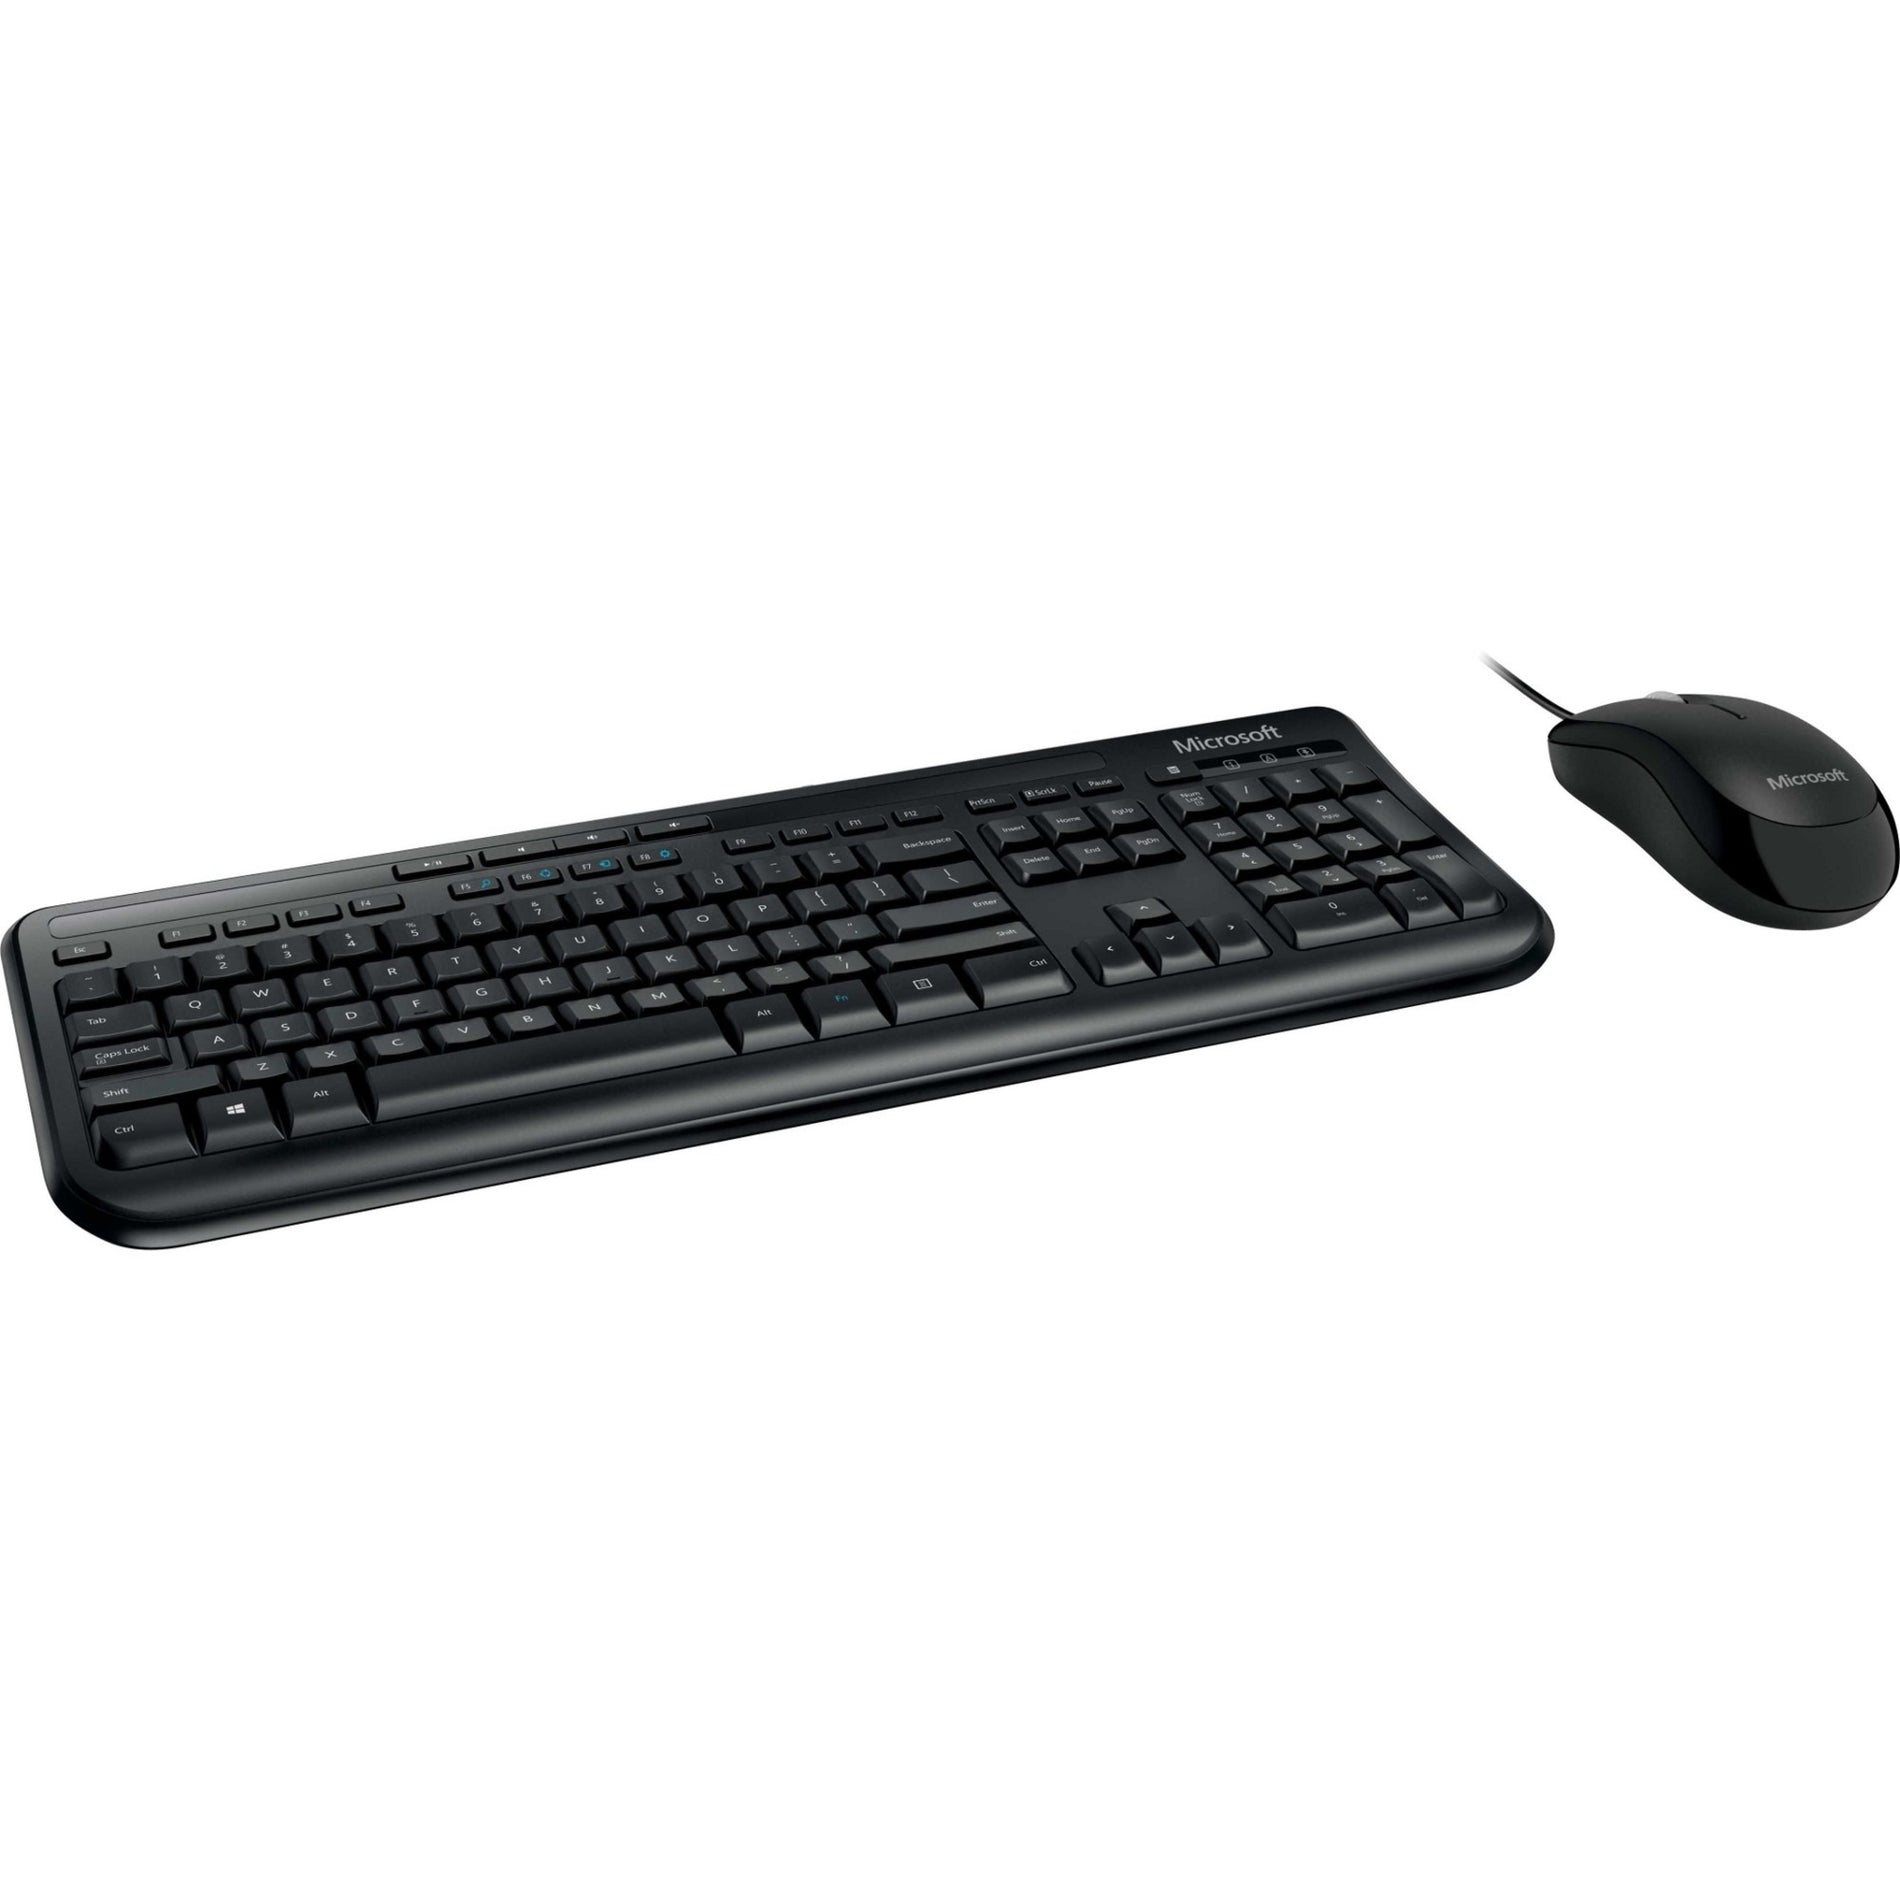 Microsoft APB-00001 Wired Desktop 600 Keyboard and Mouse, Spill Resistant, Symmetrical Mouse, 3 Year Warranty